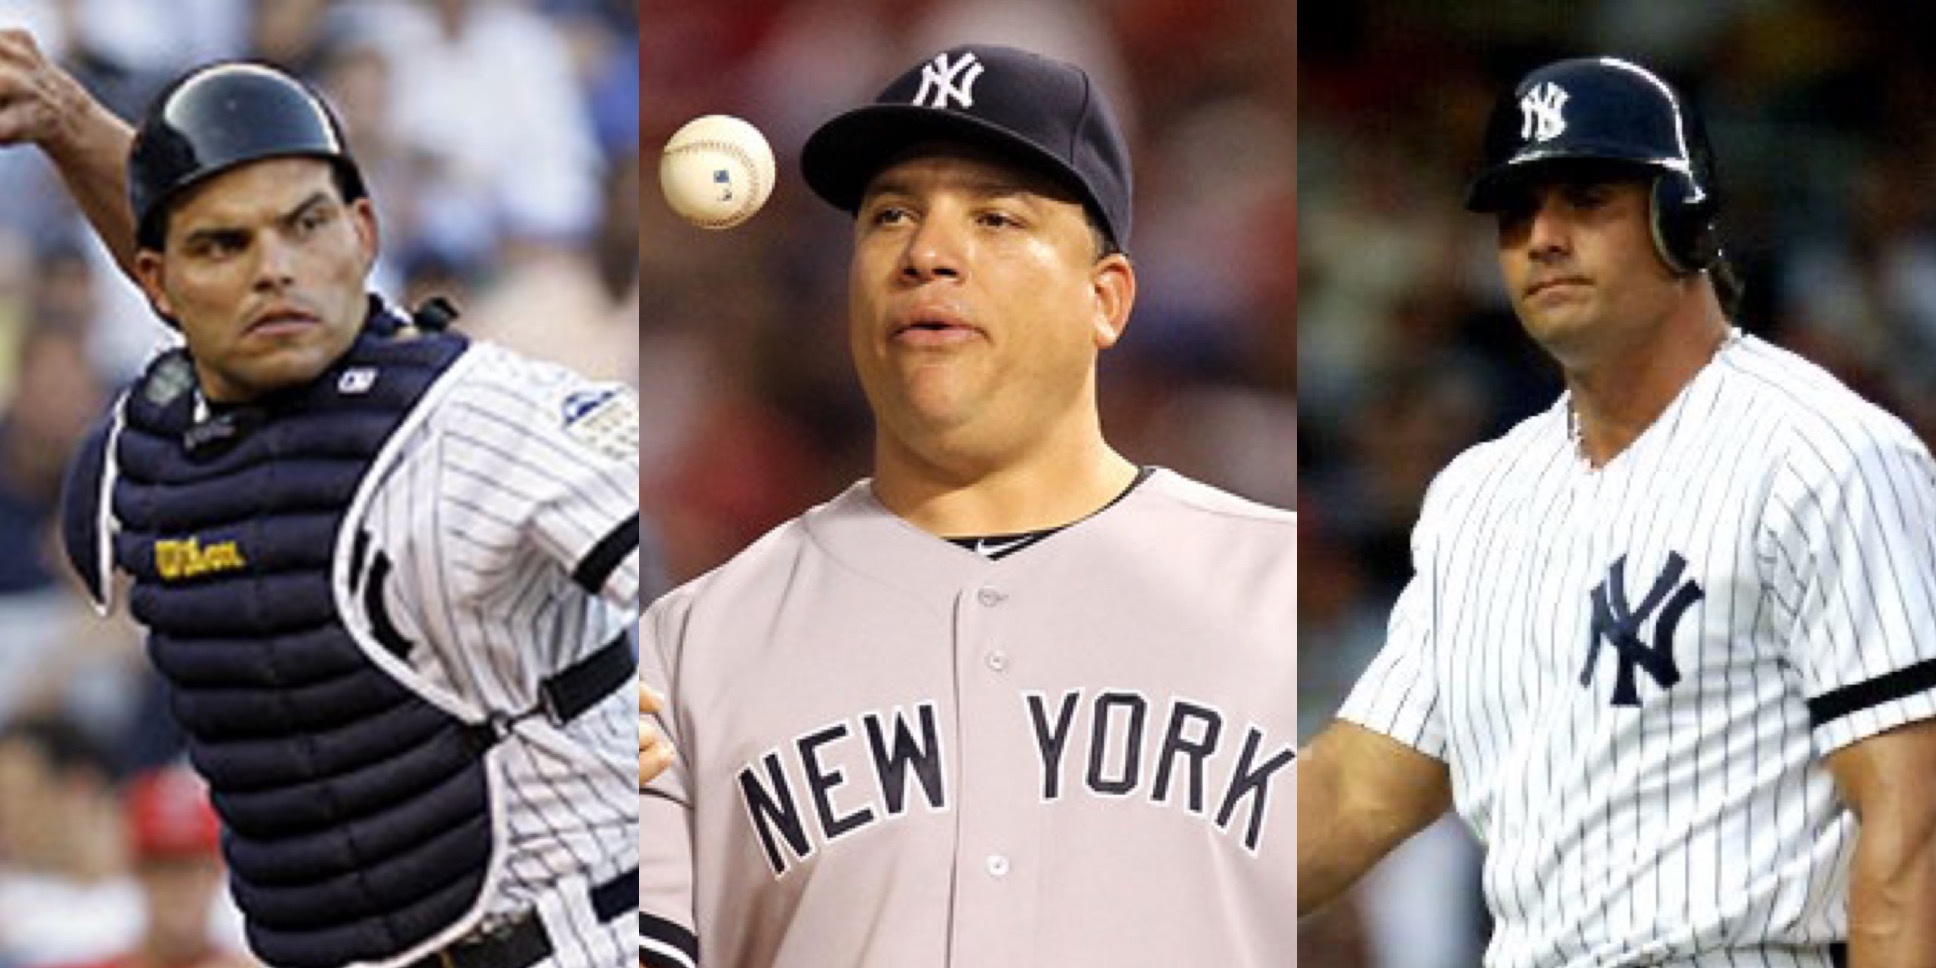 Everyone gets to be a Yankee once: The best of the past their